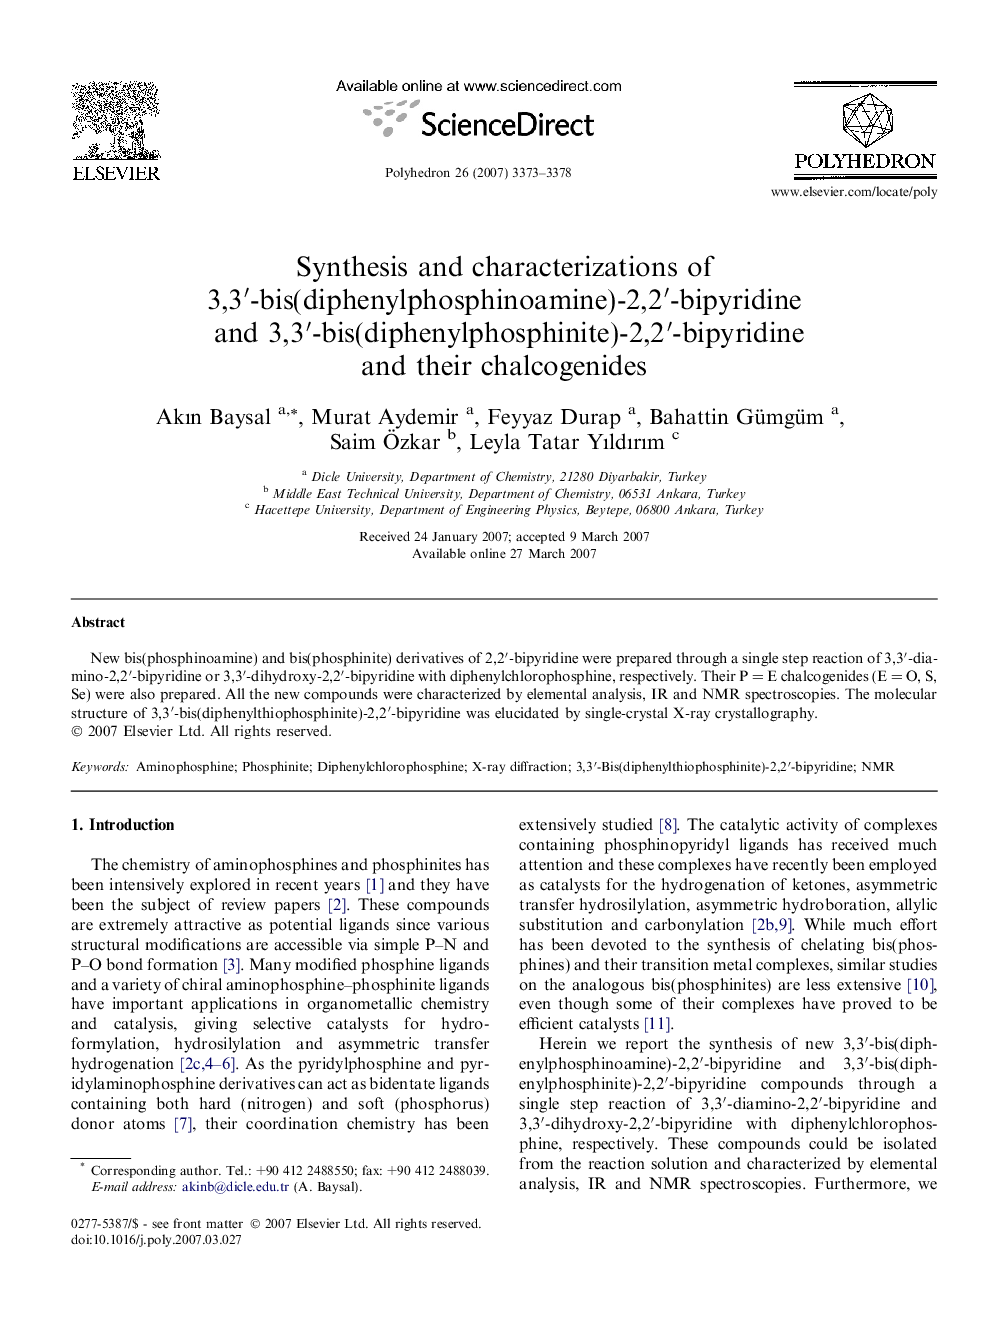 Synthesis and characterizations of 3,3′-bis(diphenylphosphinoamine)-2,2′-bipyridine and 3,3′-bis(diphenylphosphinite)-2,2′-bipyridine and their chalcogenides